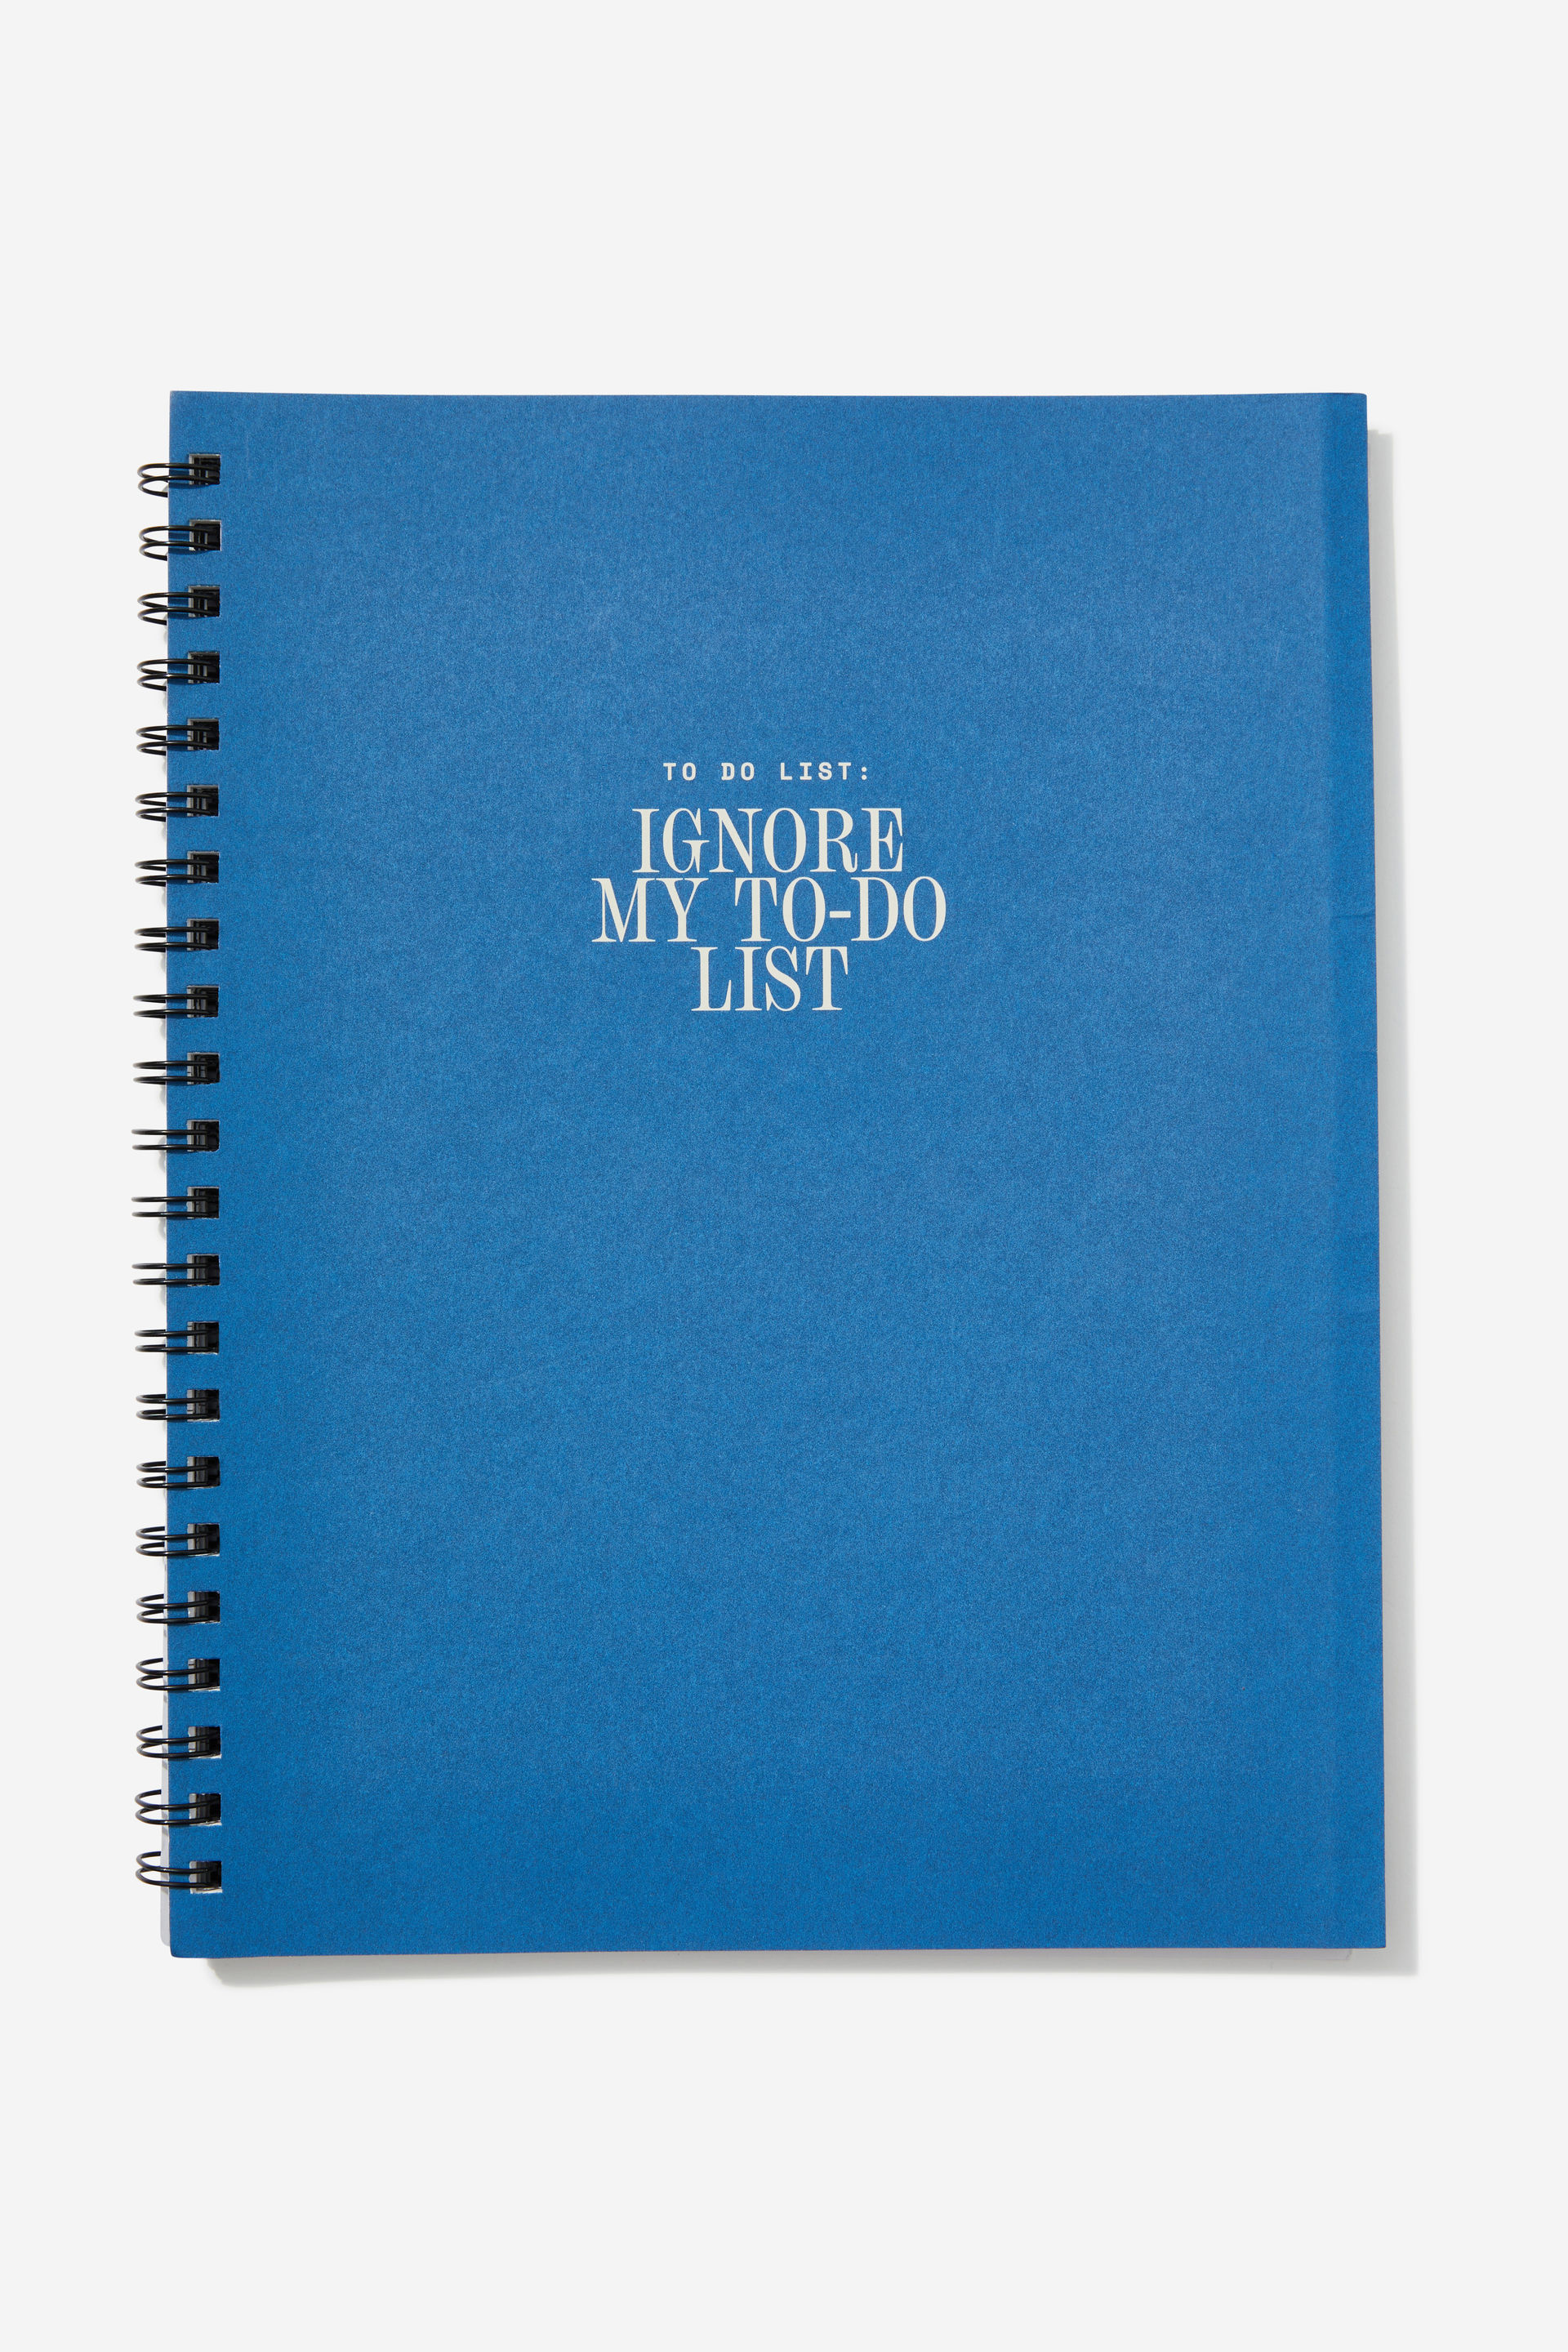 Typo - A4 Campus Notebook - To do list navy